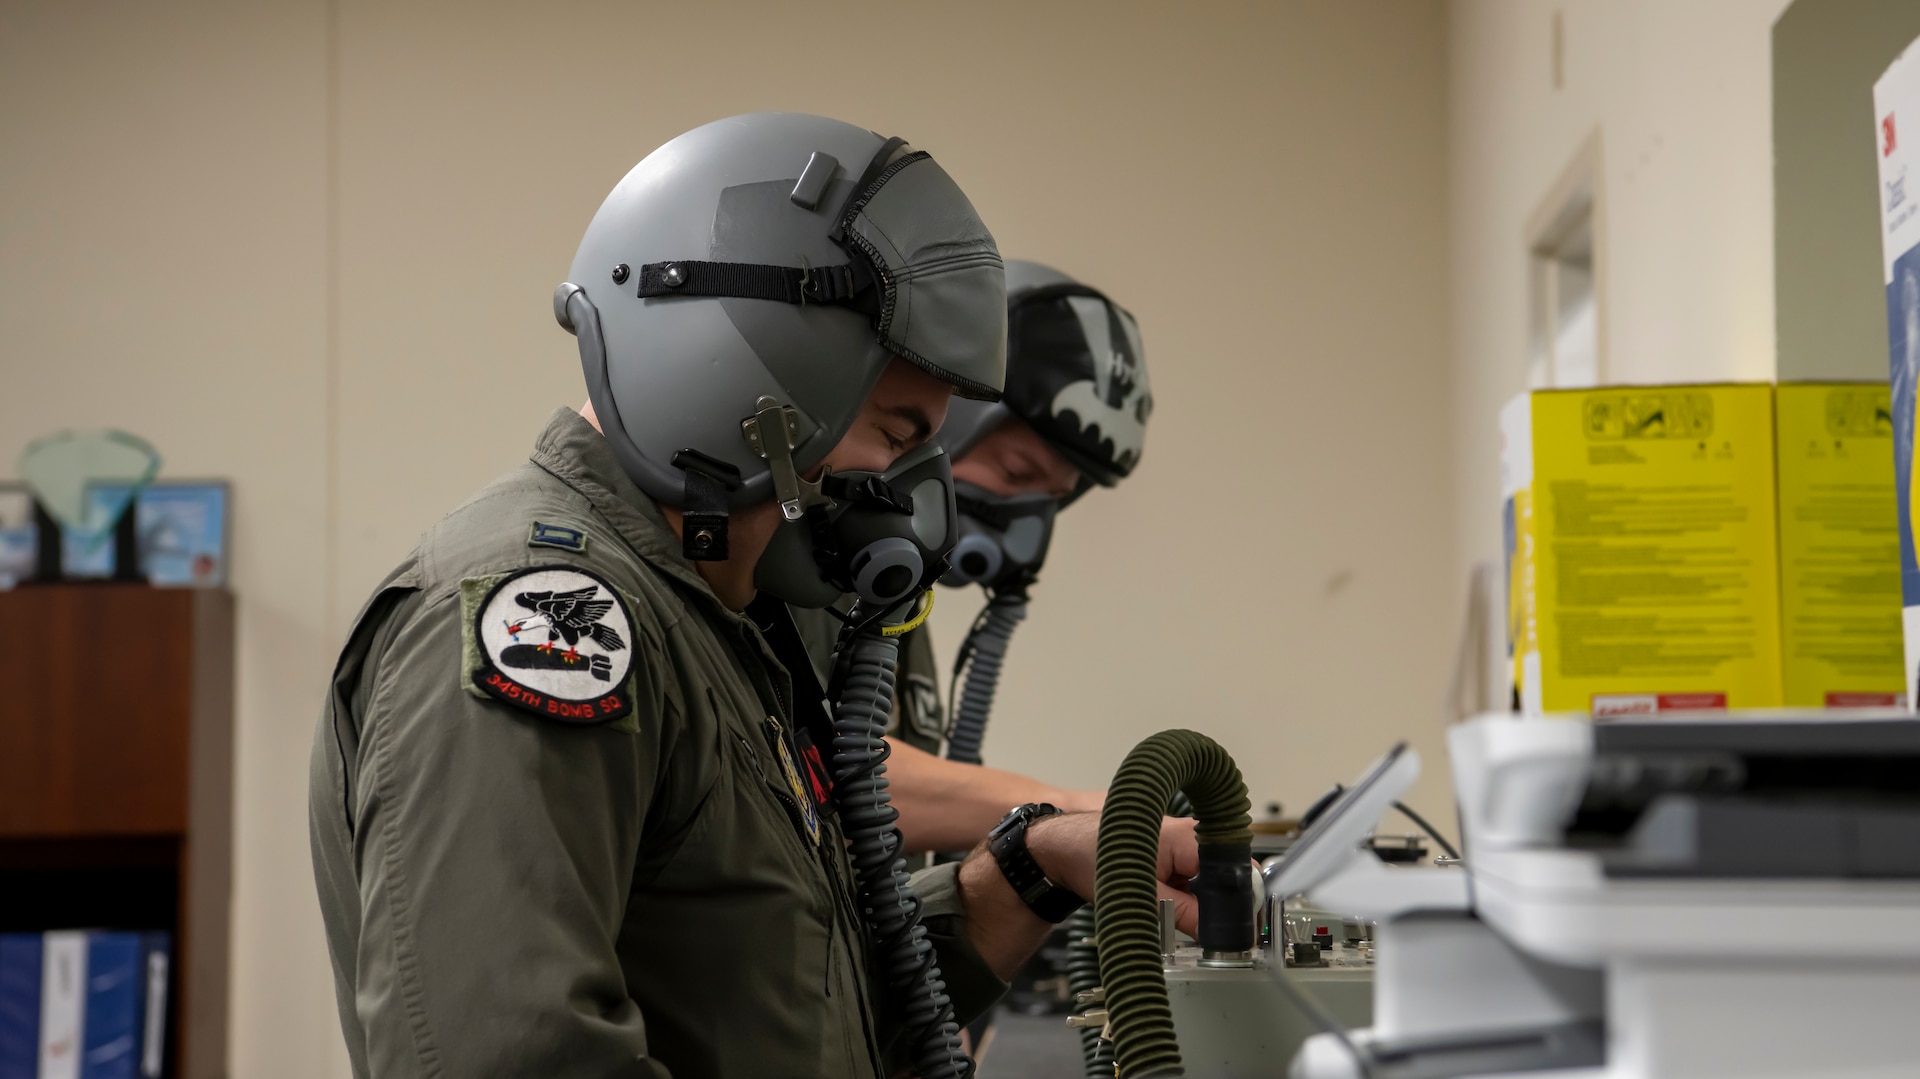 Capt. Ryan Woods, 345th Bomb Squadron weapons systems officer, checks his mask before flight at Dyess Air Force Base, Texas Sept. 7th, 2022. Crews supported a Bomber Task Force mission to U.S. Southern Command. Within the mission, they integrated with partnered nations, such as Ecuador and Panama. (U.S. Air Force photo by Senior Airman Mercedes Porter)